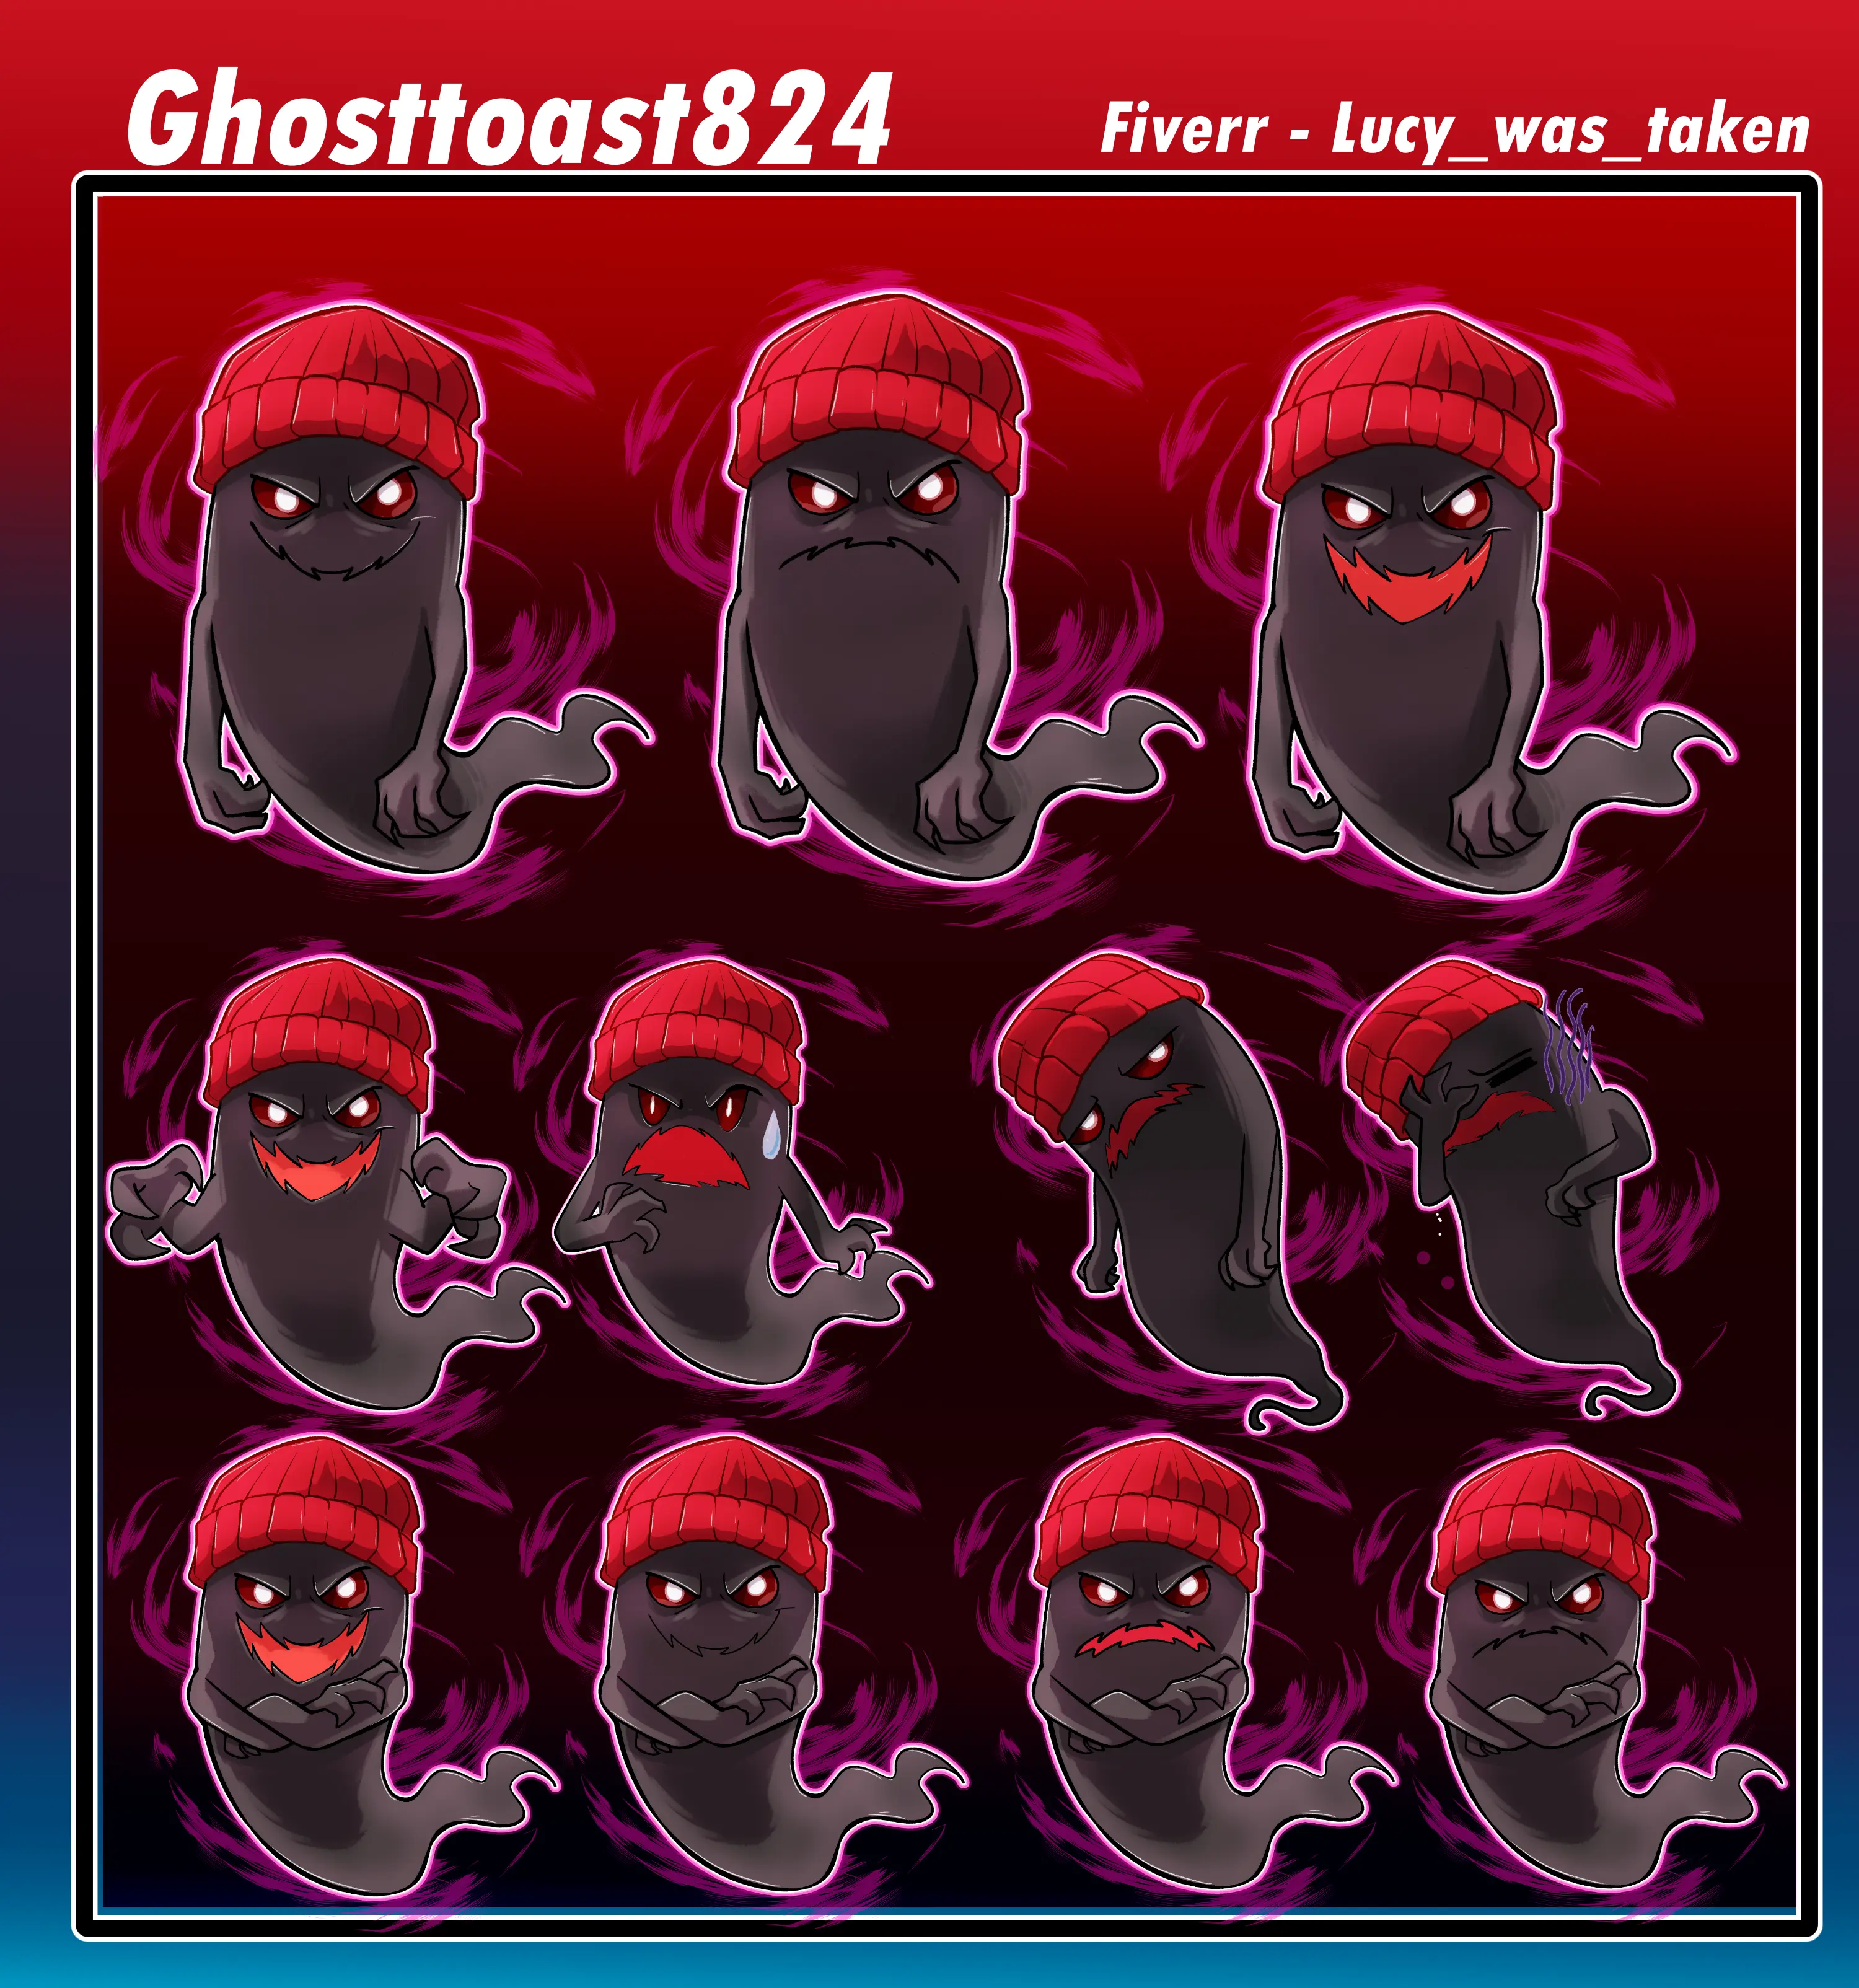 ghosttoast pngs final.png